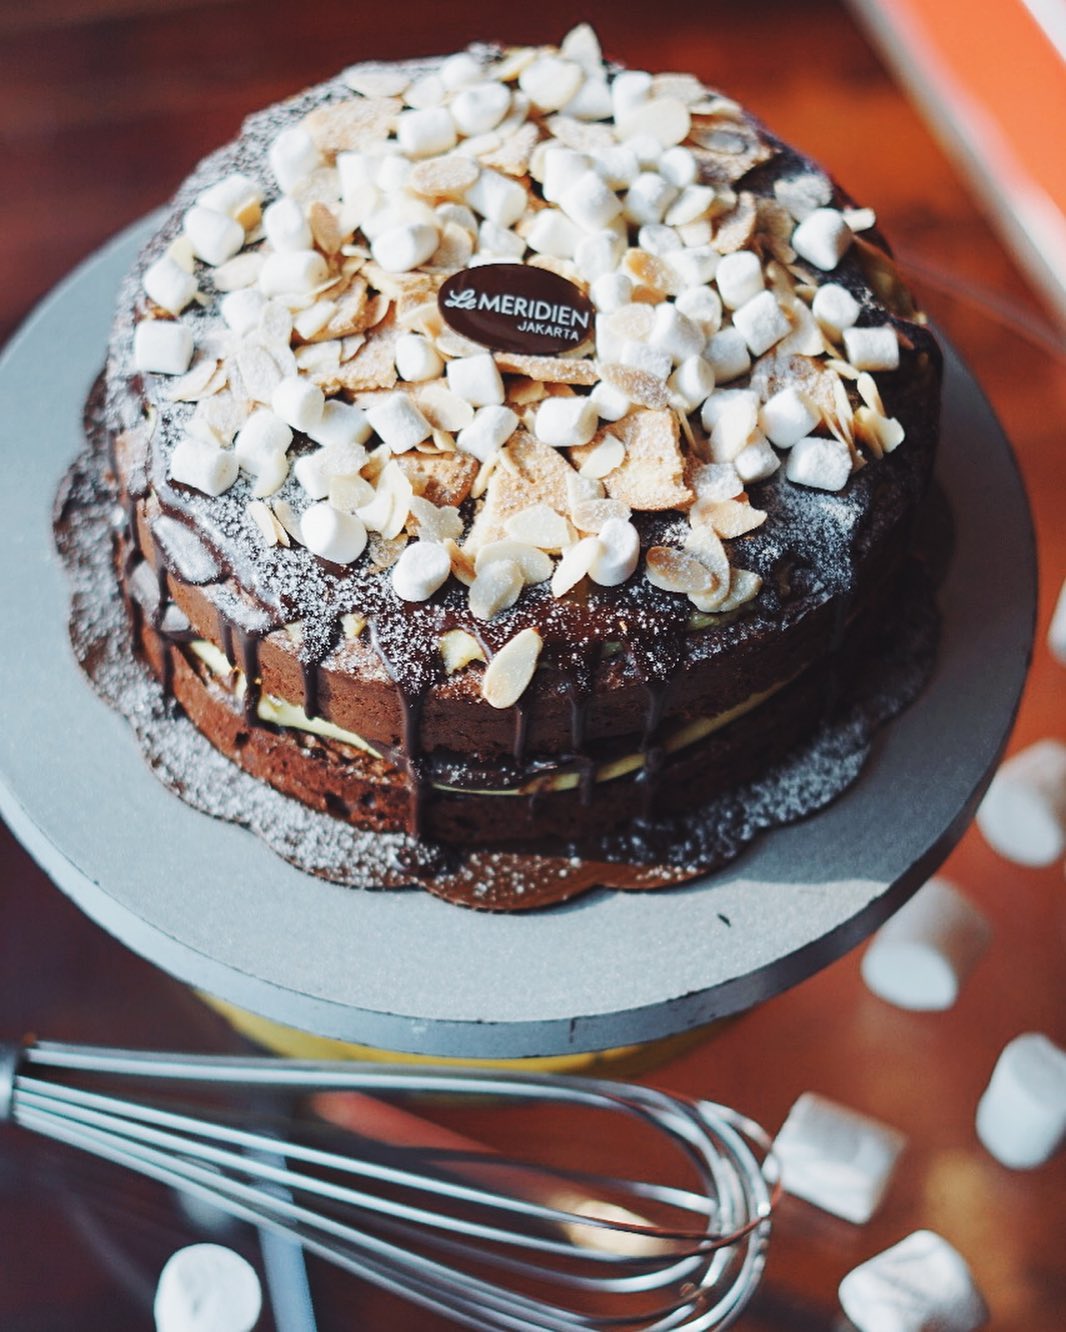 11 Best Places to Buy Birthday Cakes in Jakarta | Flokq Coliving Blog